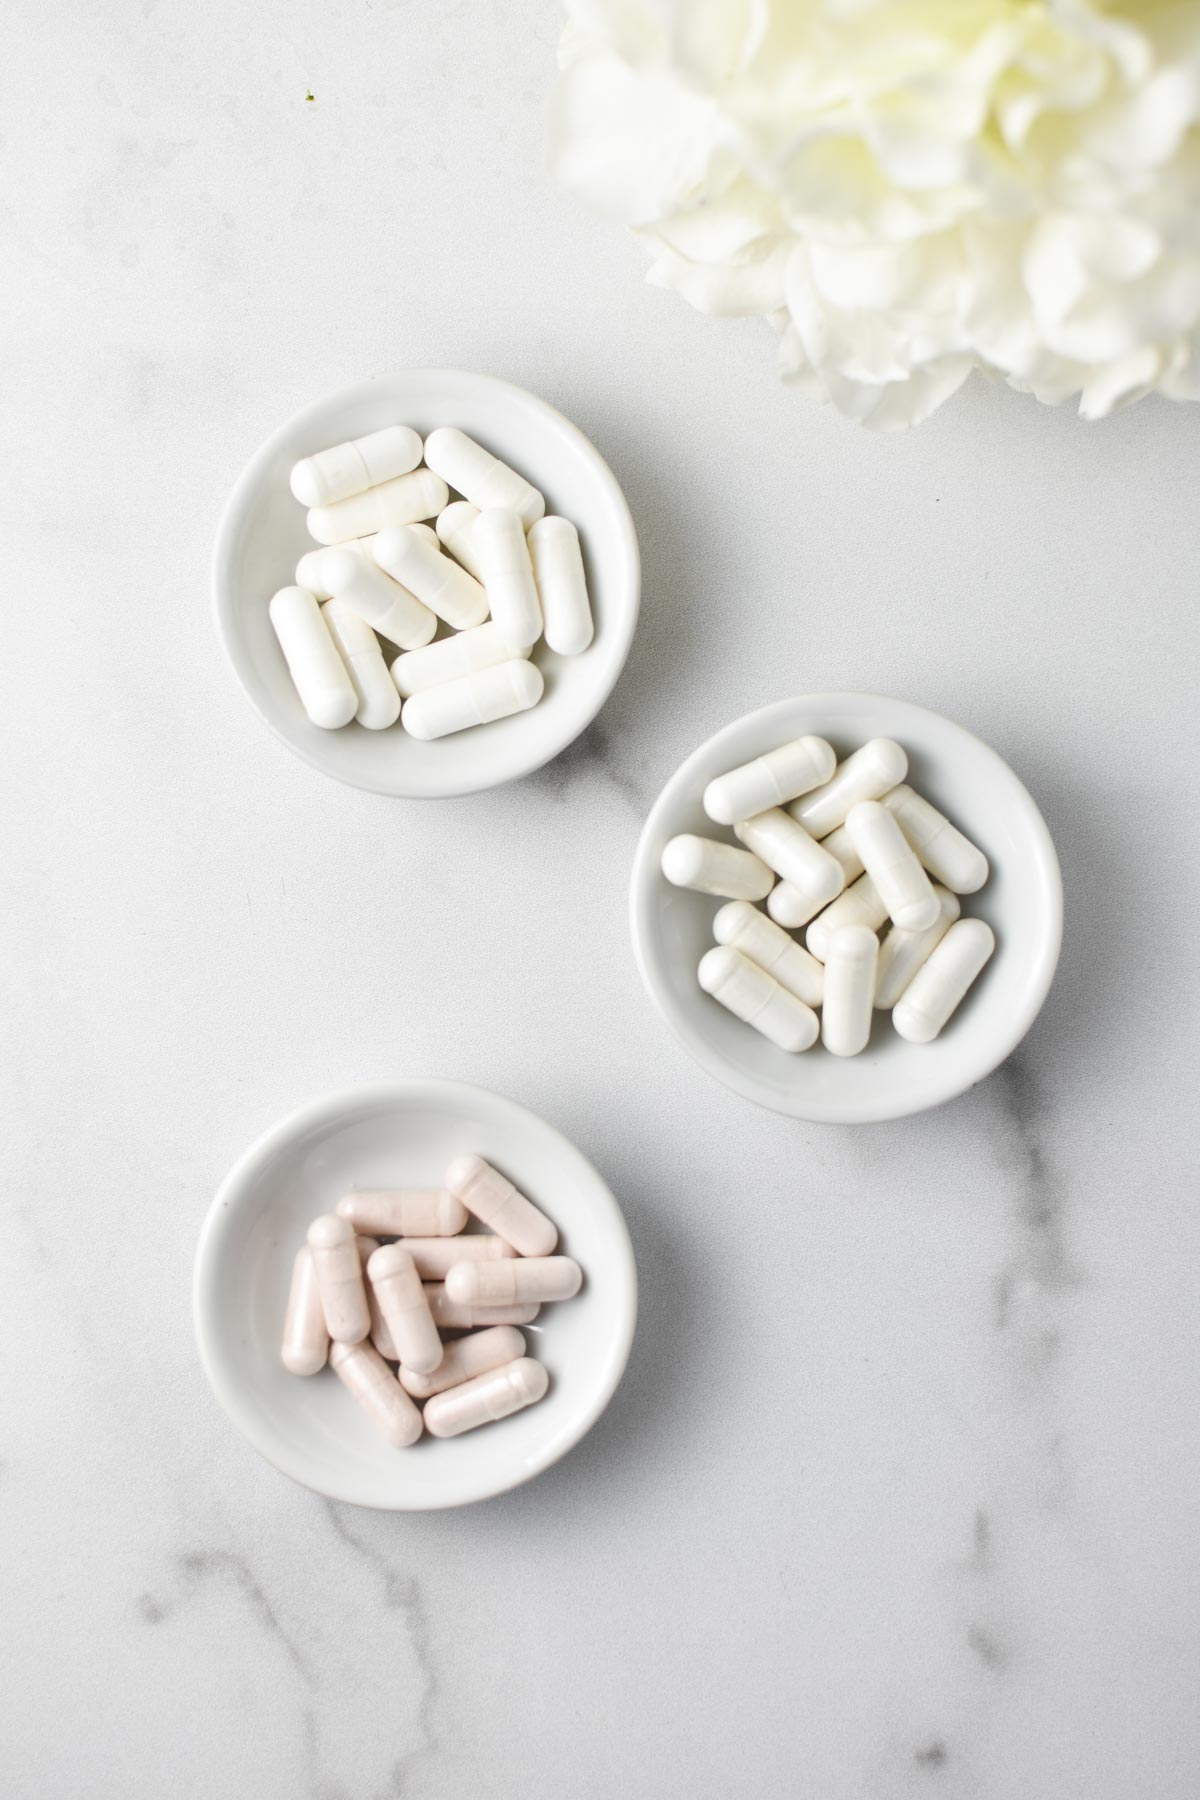 Three cups filled with 3 different types of magnesium supplements